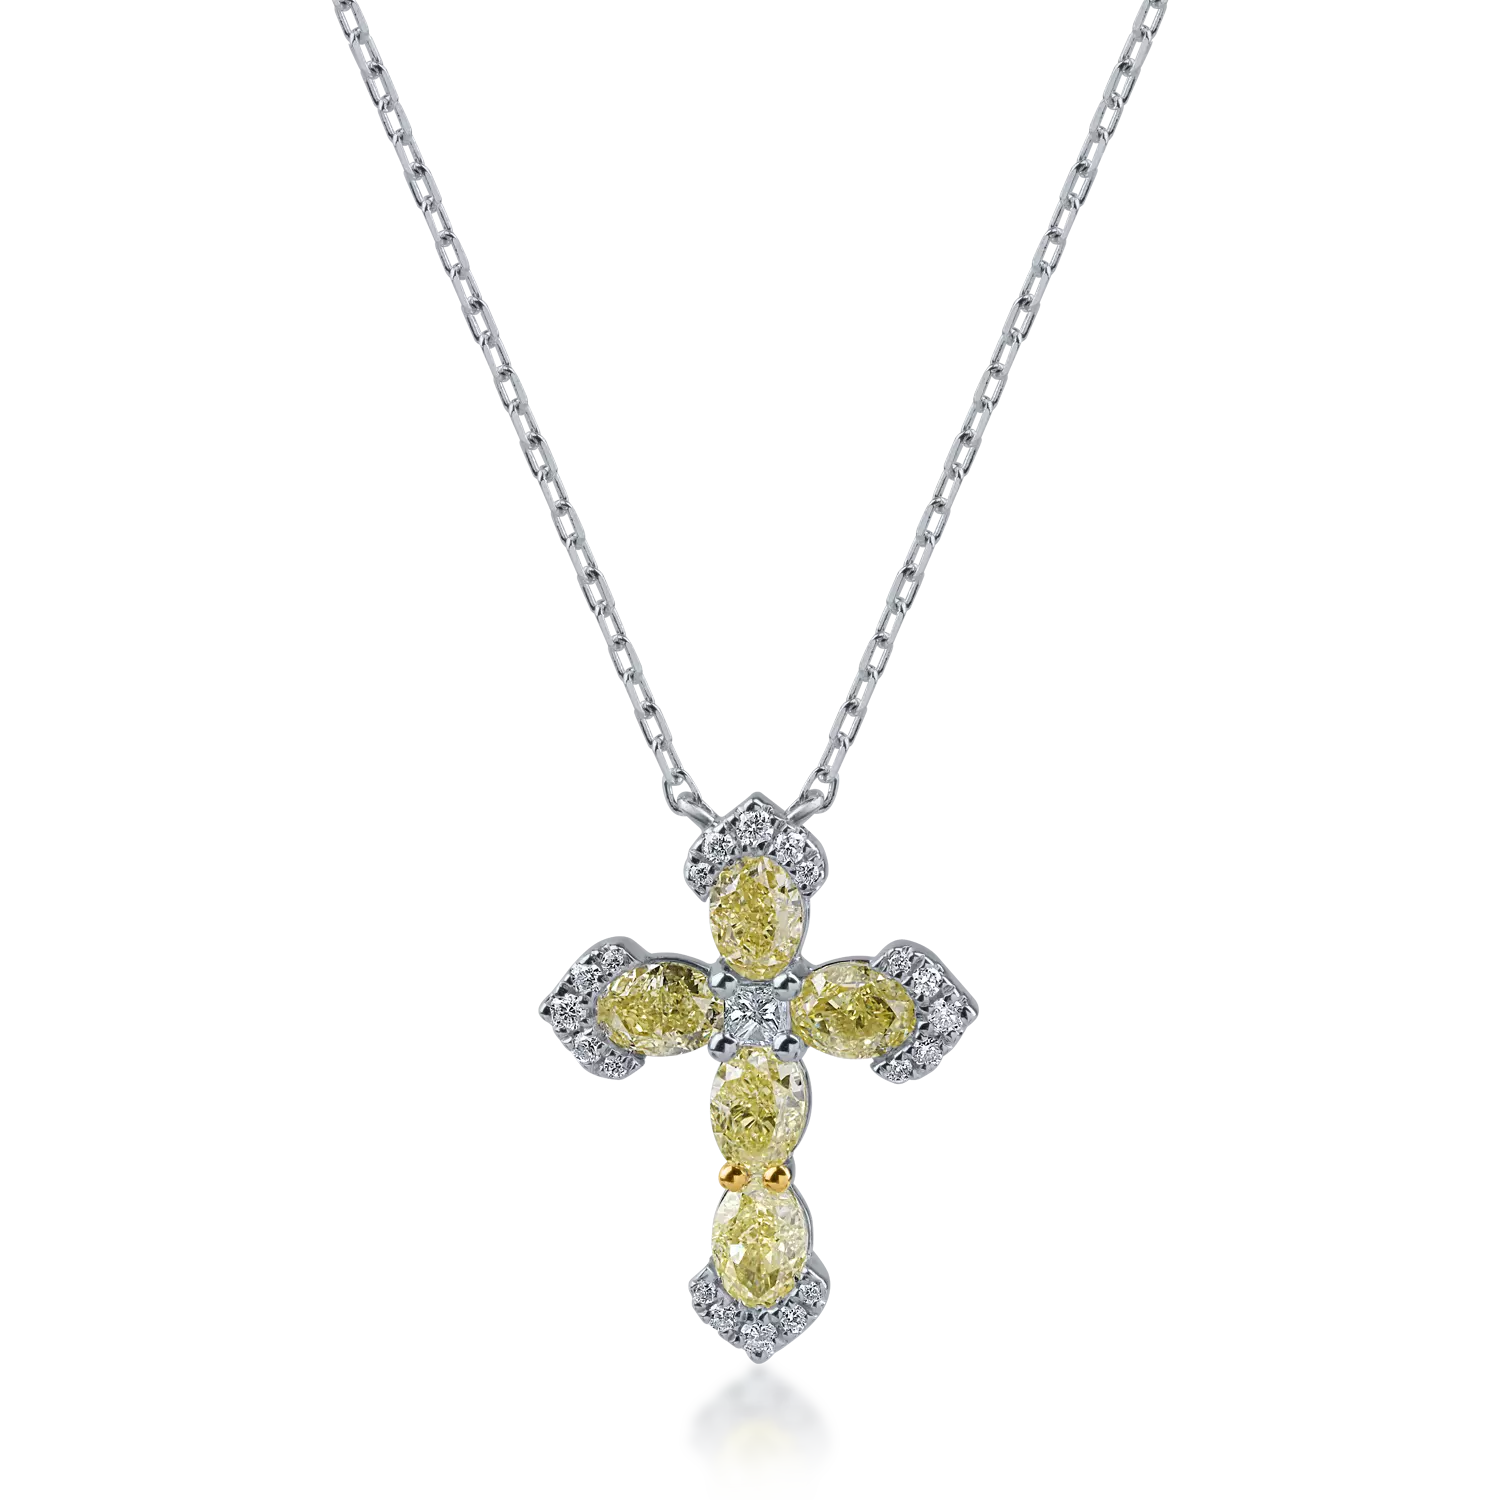 White gold cross pendant necklace with 1.25ct yellow diamonds and 0.13ct clear diamonds